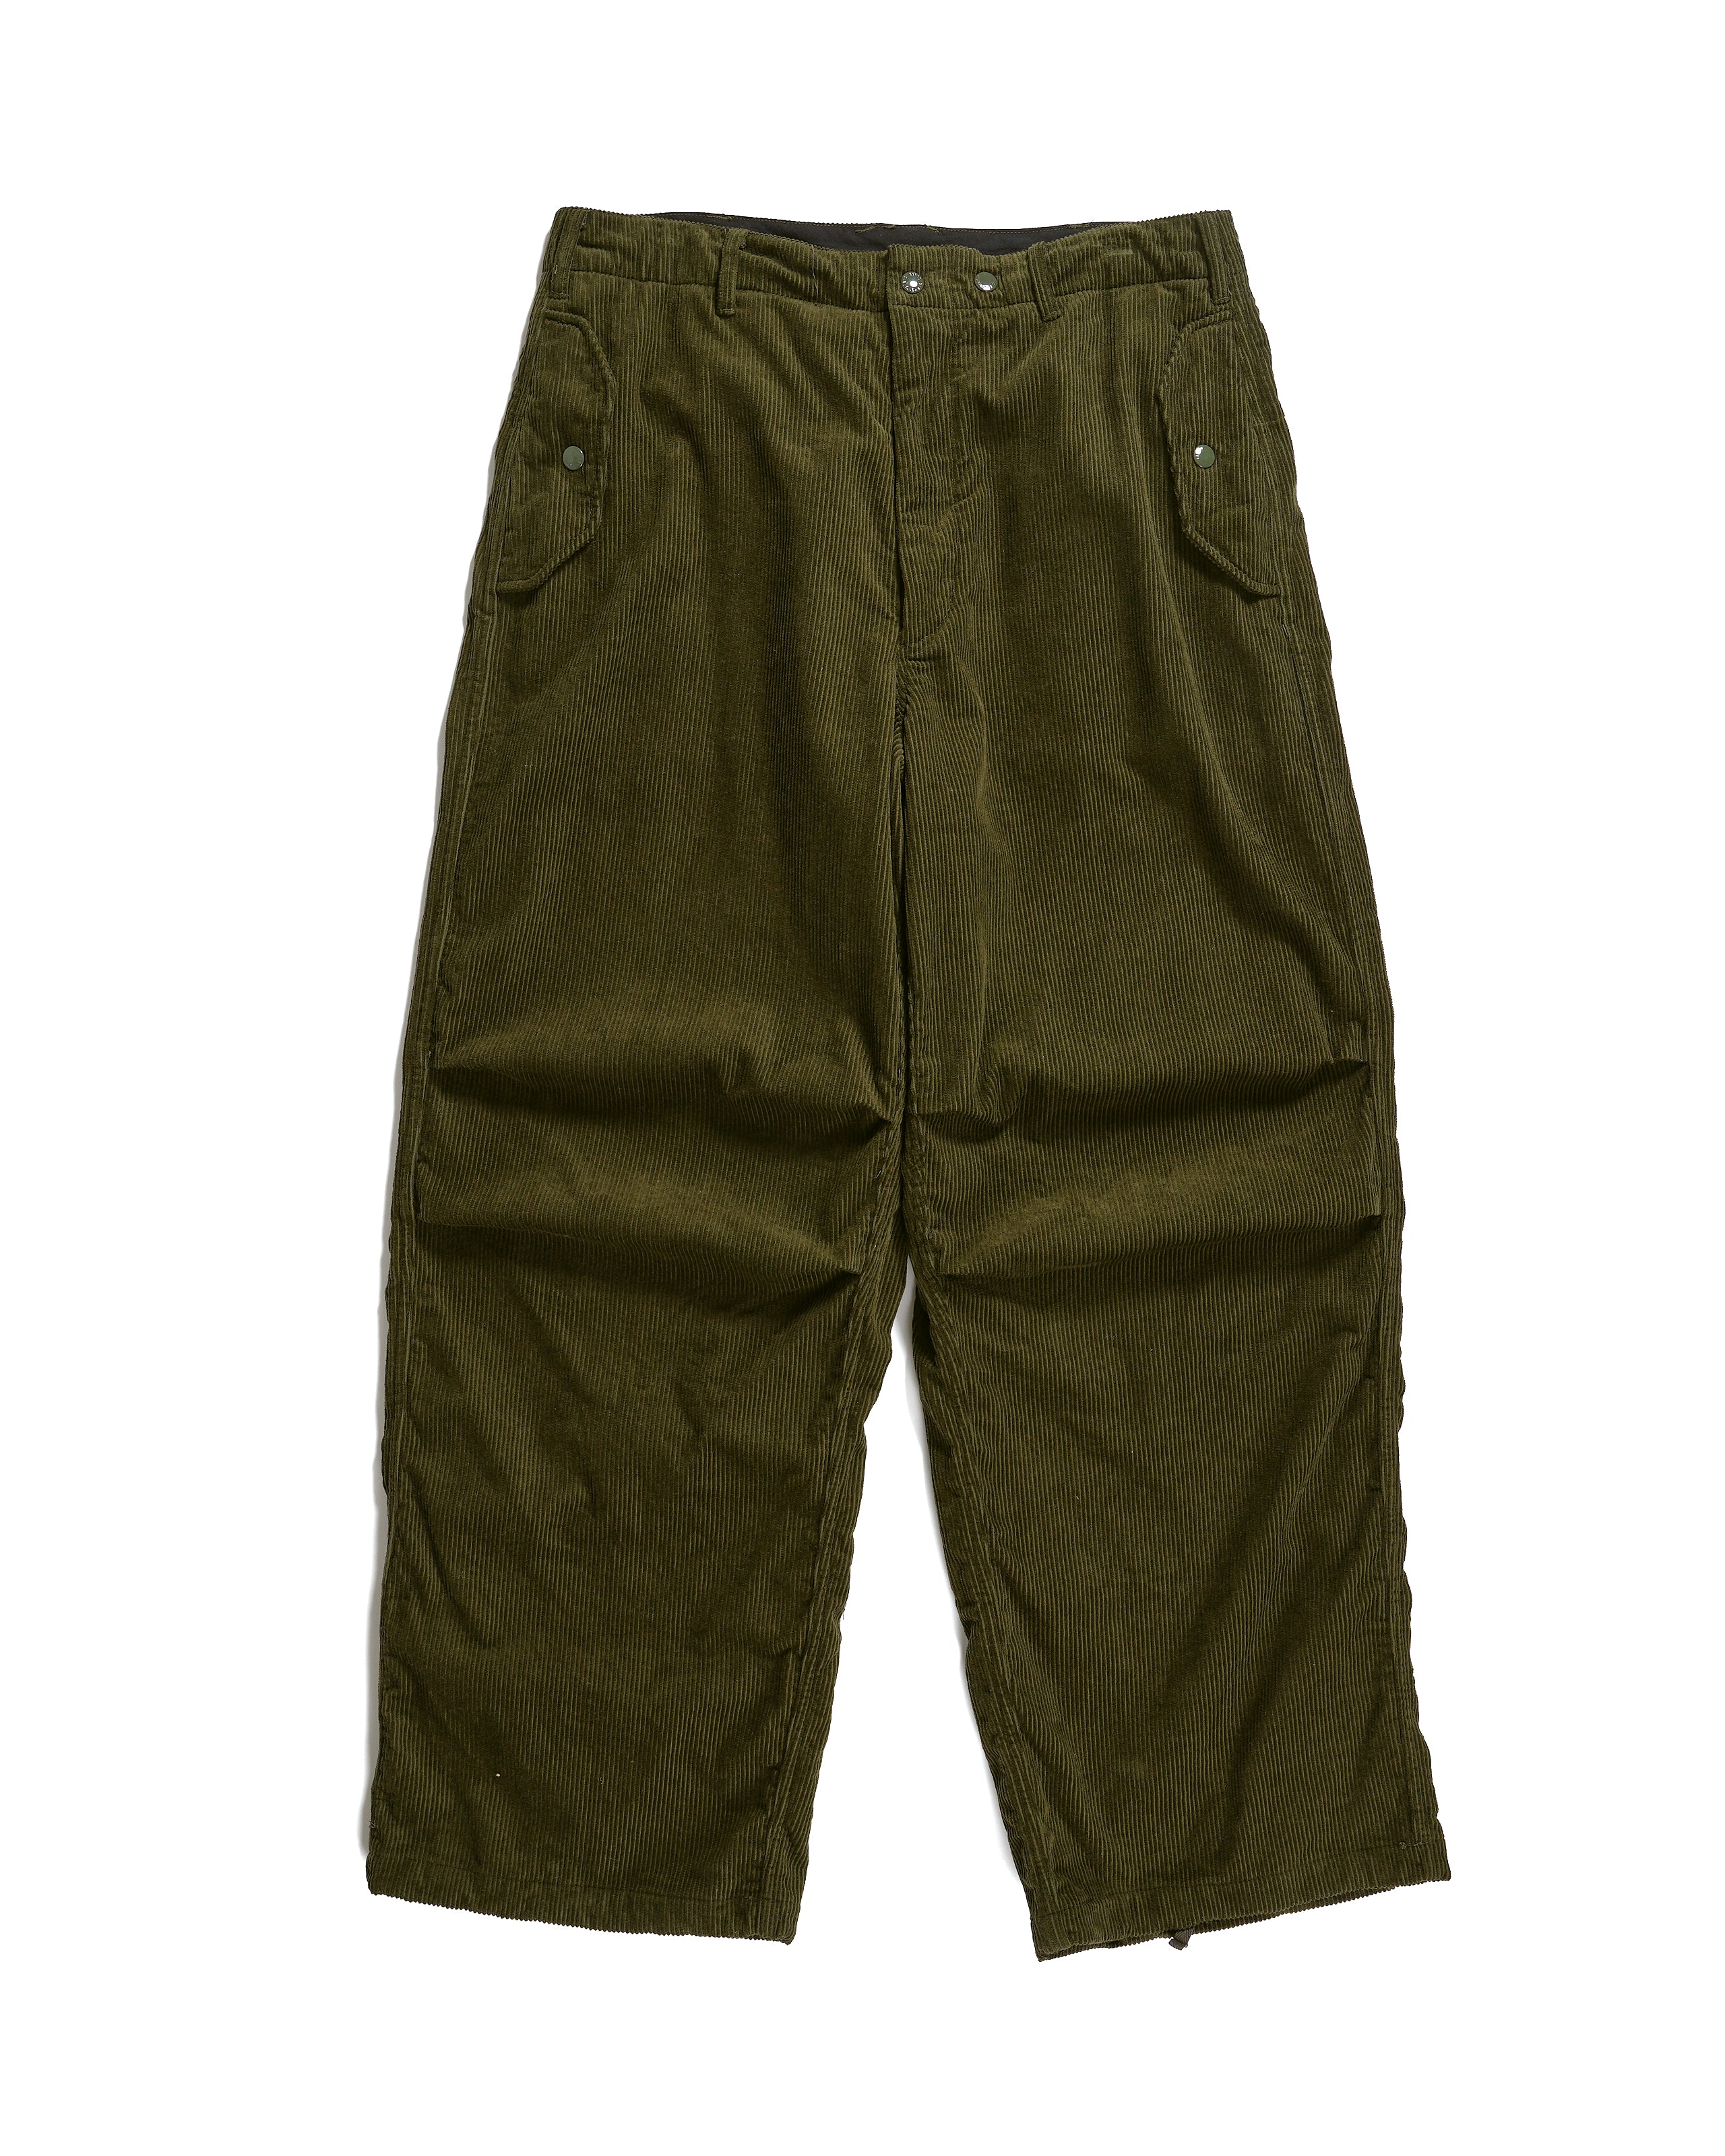 Engineered Garments Over Pant - Olive Cotton 8W Corduroy